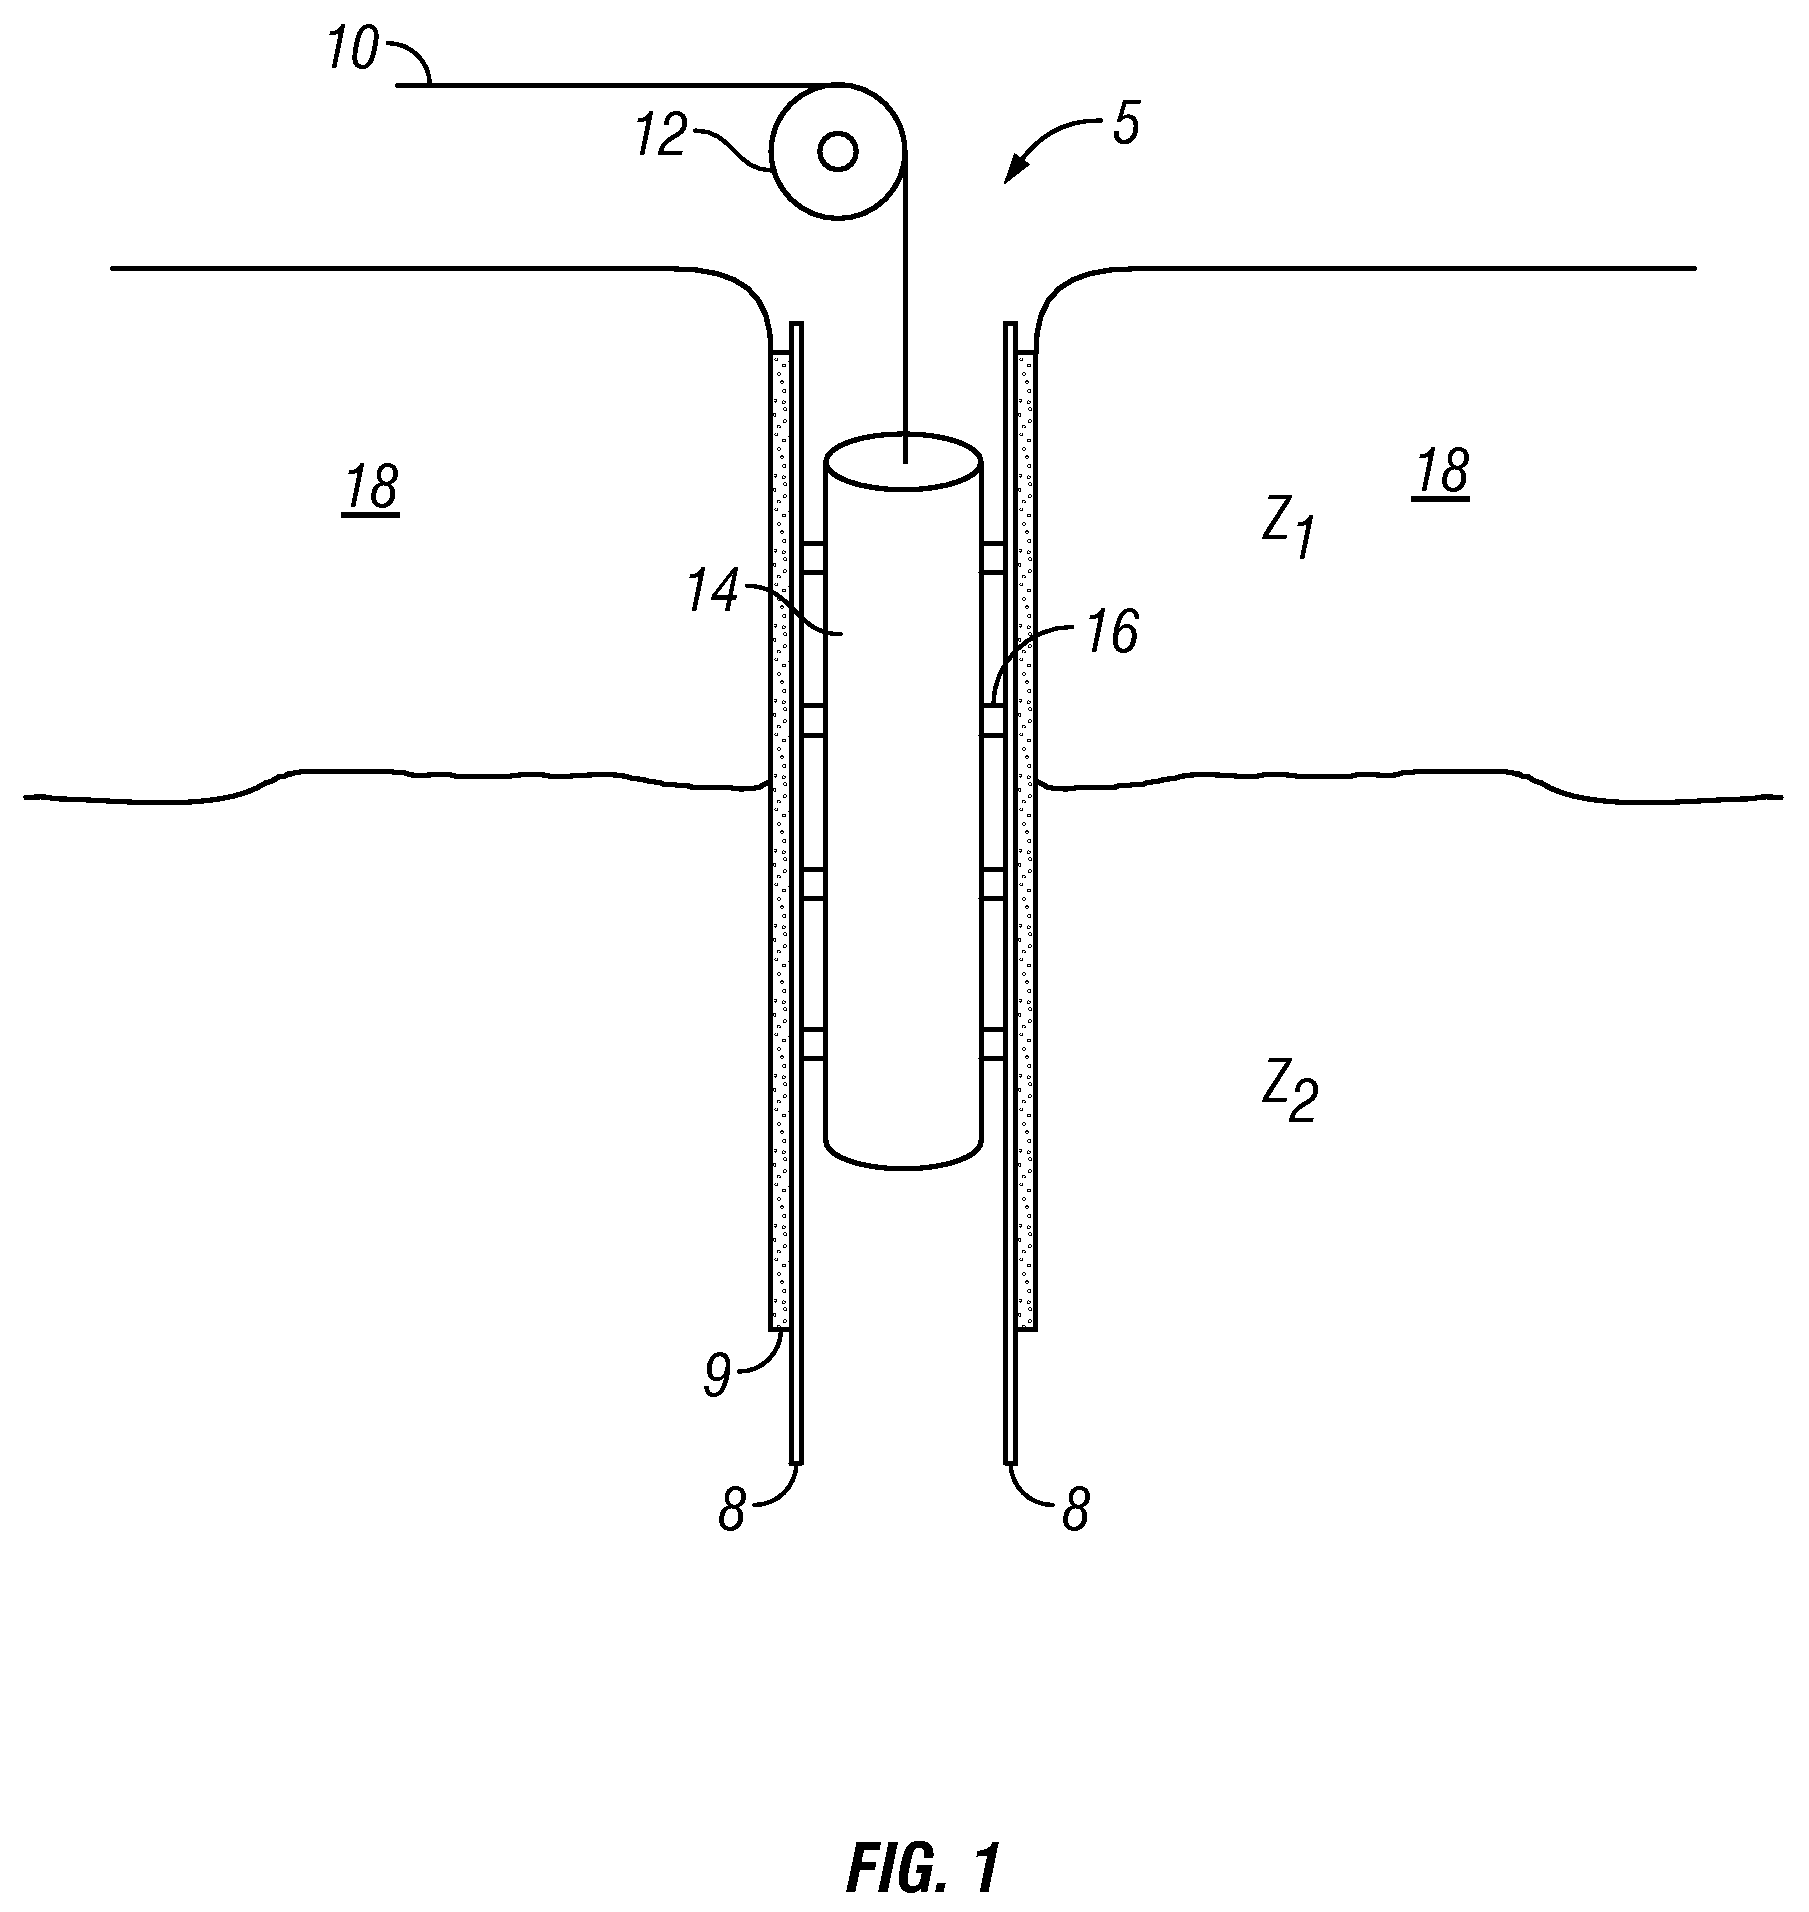 Combined electro-magnetic acoustic transducer